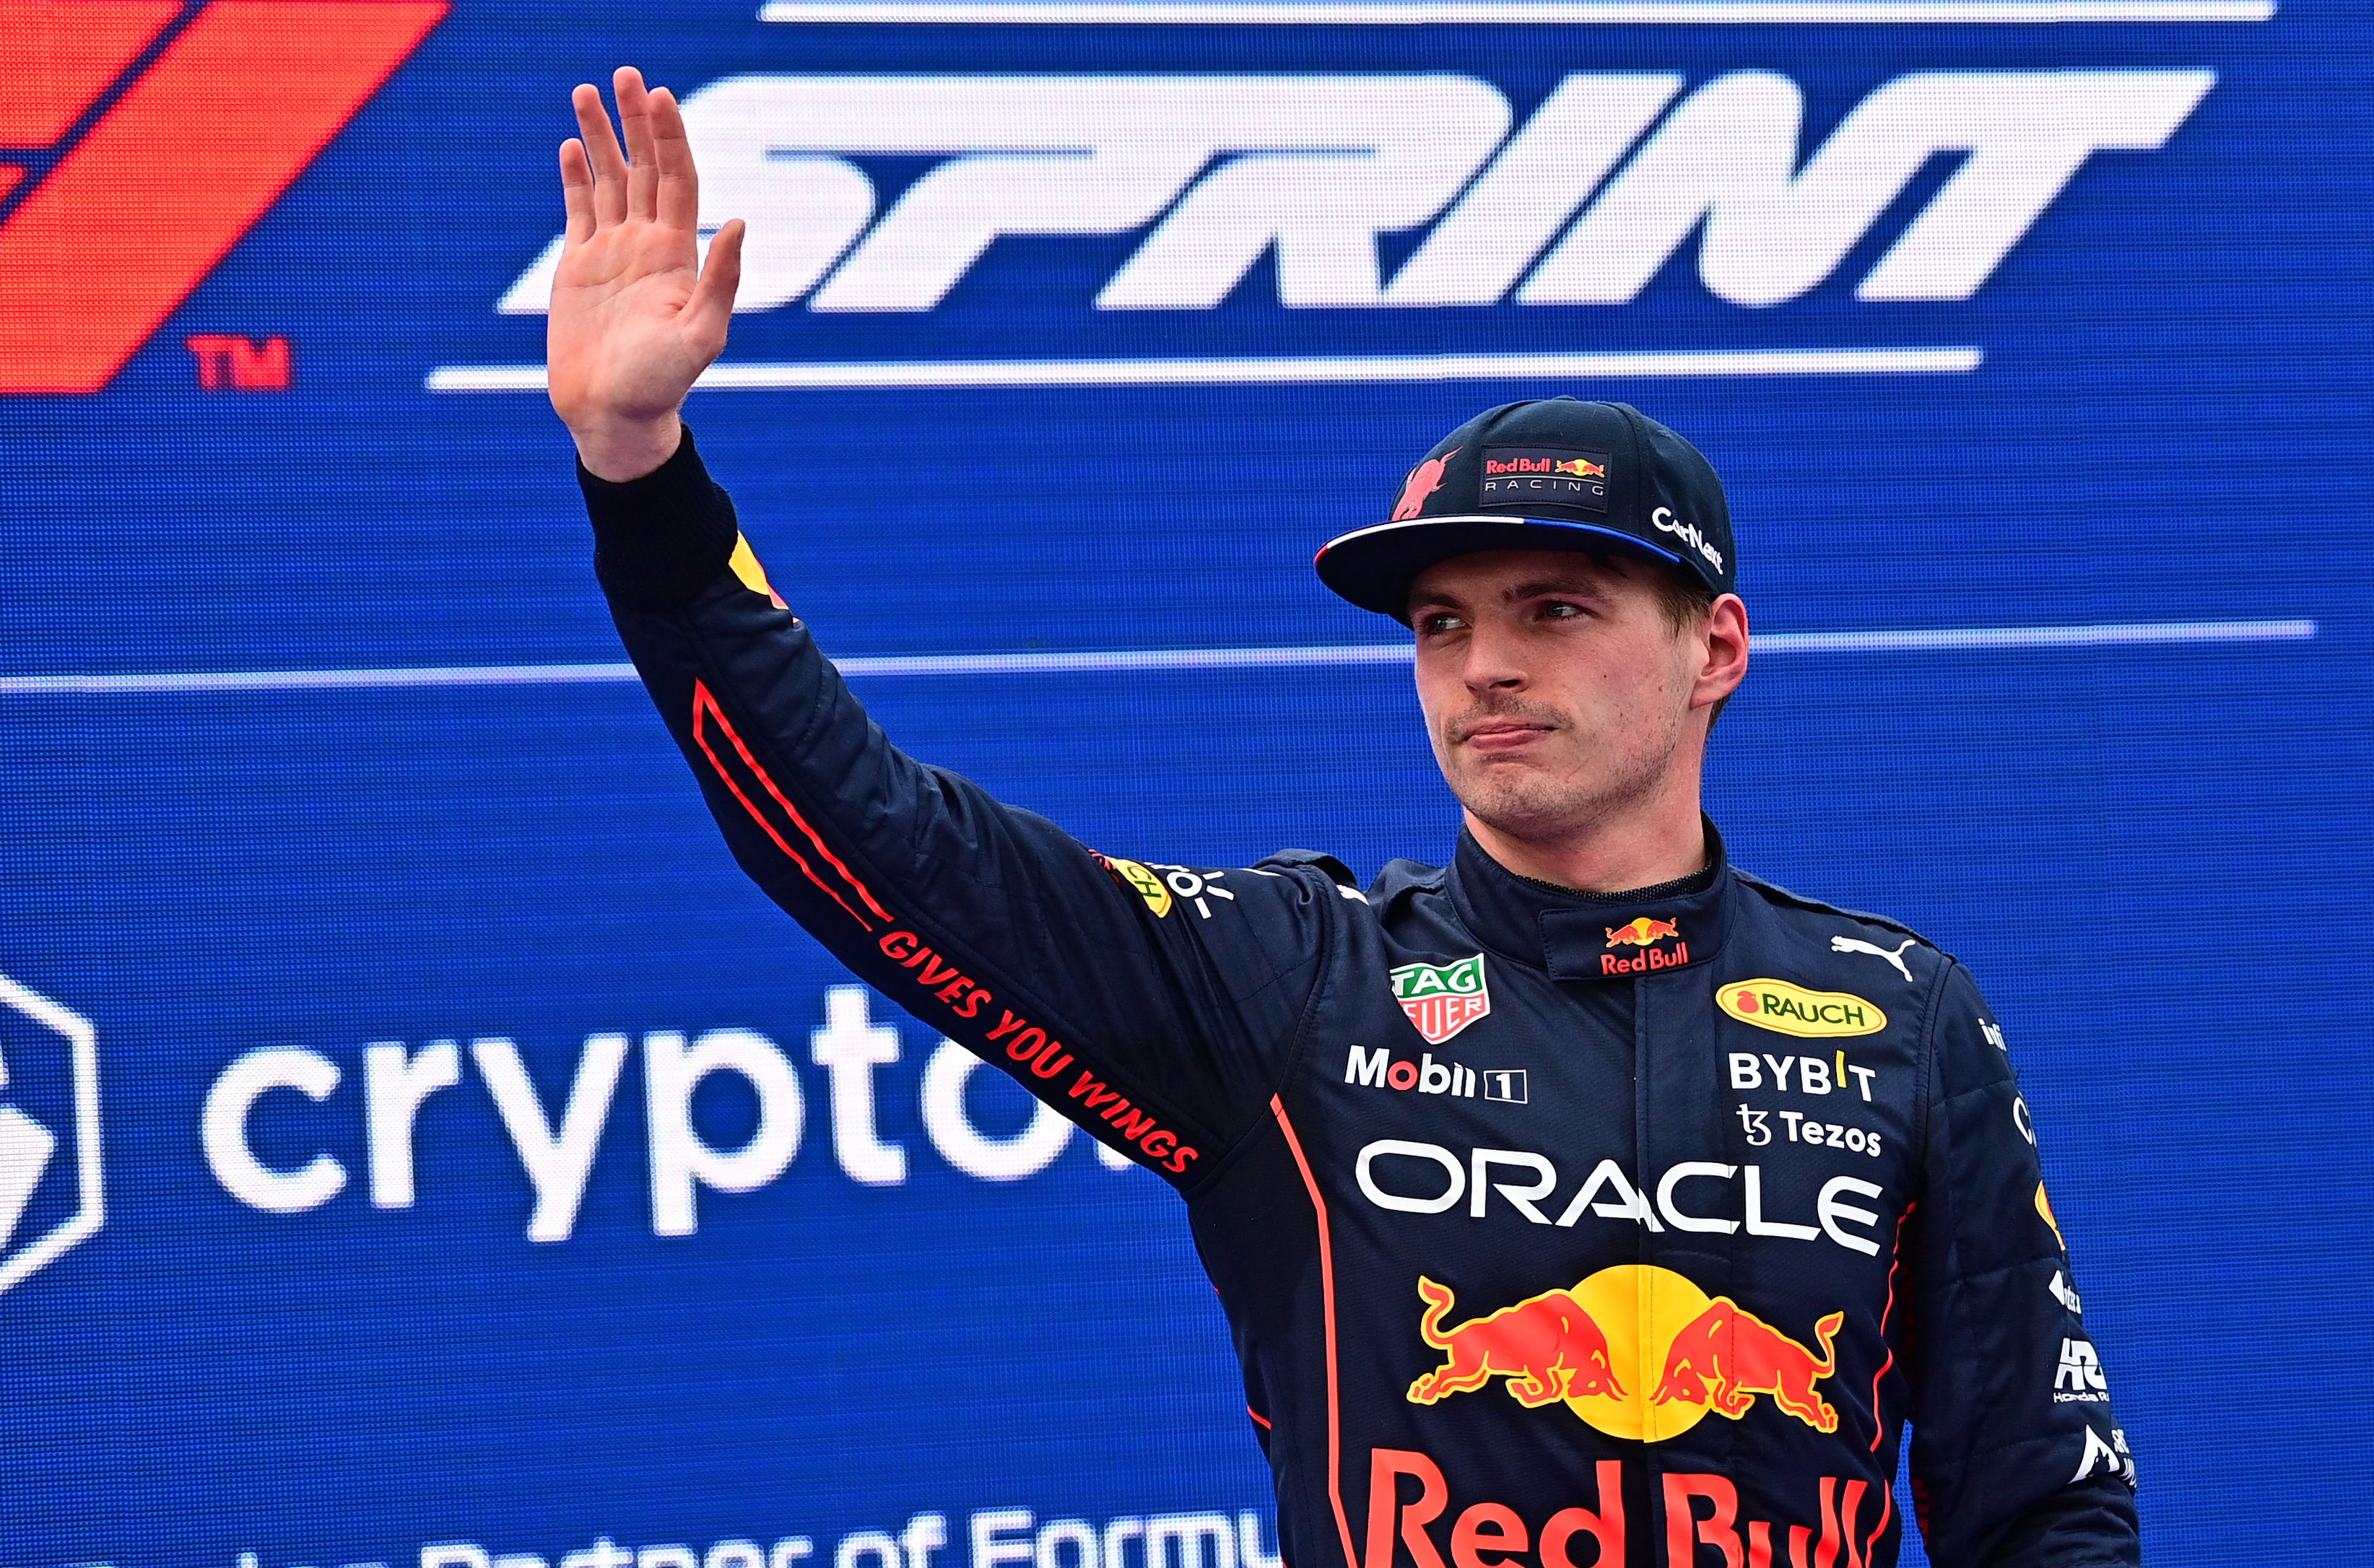 Verstappen claimed the victory and pole for Sunday’s race